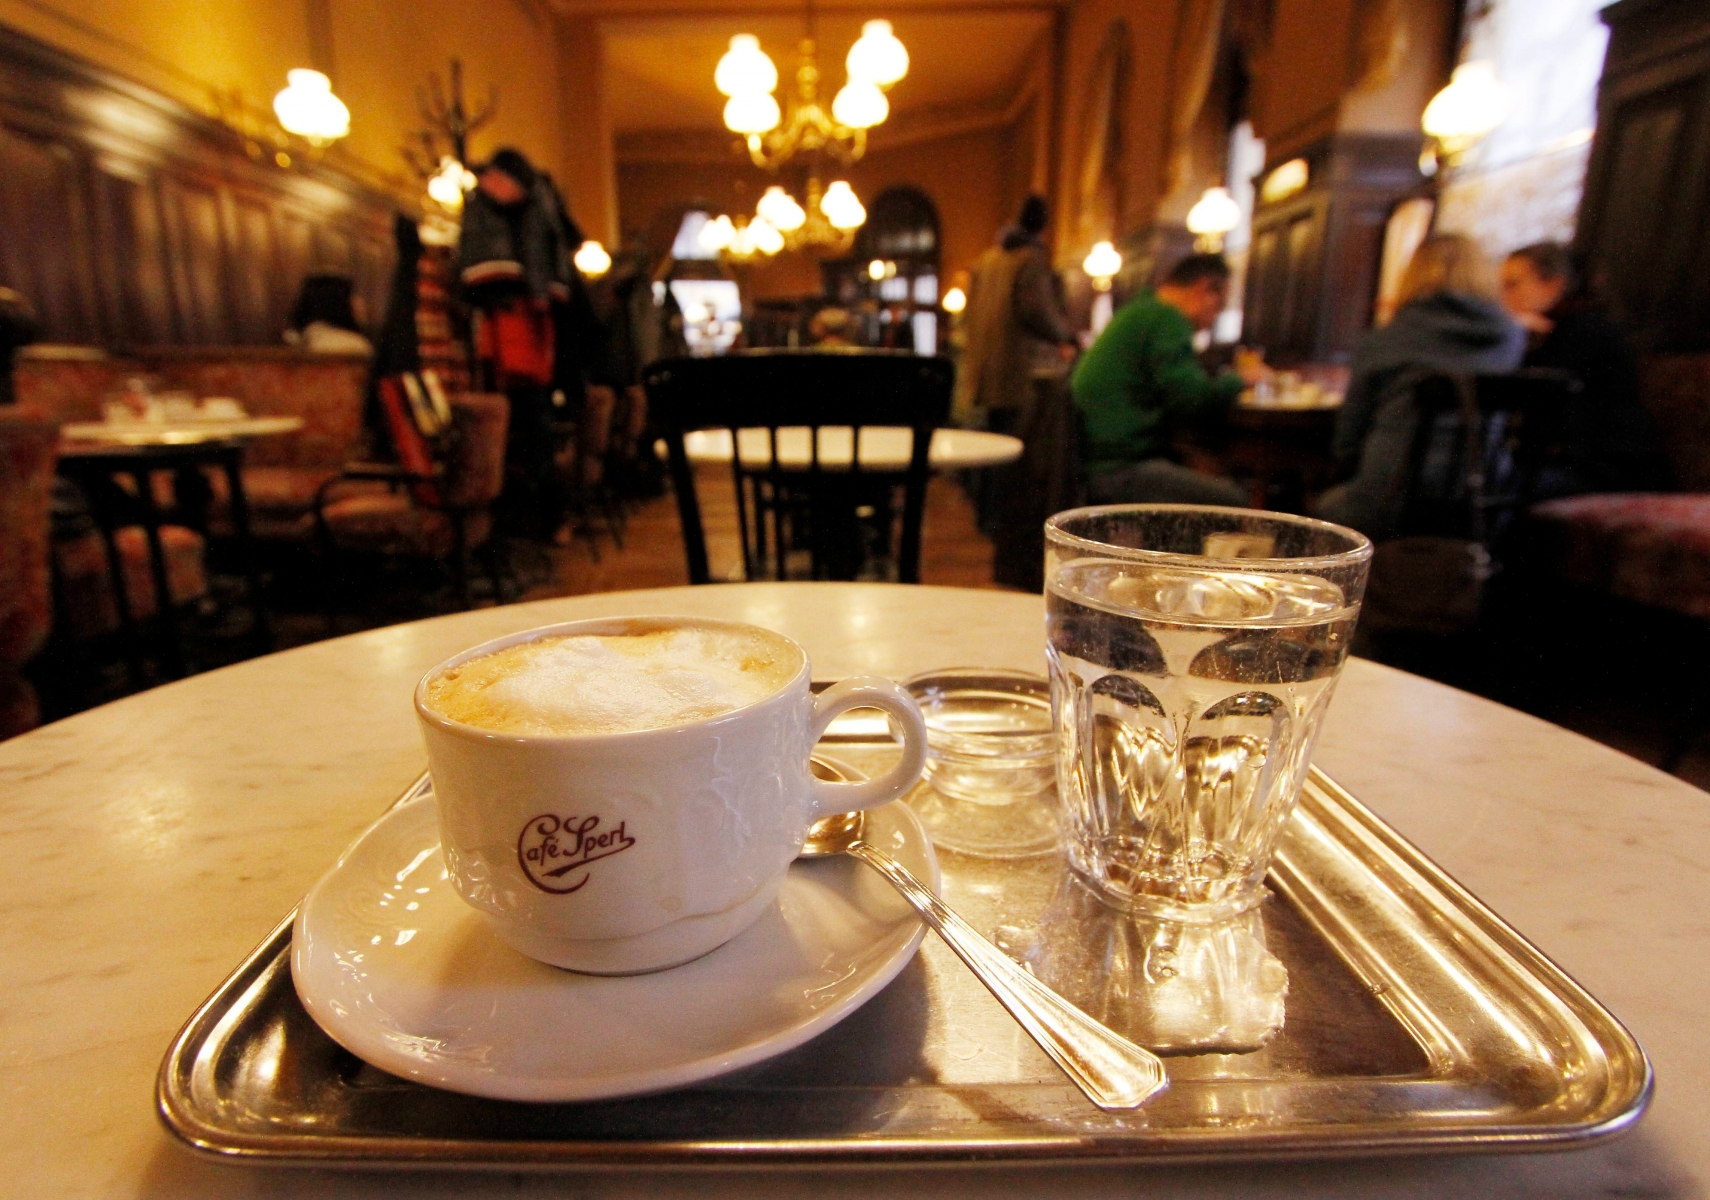 FILE - In this Nov. 16, 2011 file photo a cup of coffee with a glass of water stands on a table at a cafe in Vienna, Austria. The Viennese take it for granted but elsewhere it is rapidly becoming a rare commodity: crystal-clear water drunk straight from the tap. Vienna gets its water supply from alpine springs, some fed by glaciers, transported for over 100 miles without the aid of pumps or other mechanical means. A glass of free Vienna water comes without asking with your cup of Viennese coffee, at least in most establishments. (AP Photo/Ronald Zak, File) Travel Trip 5 Free Things Vienna